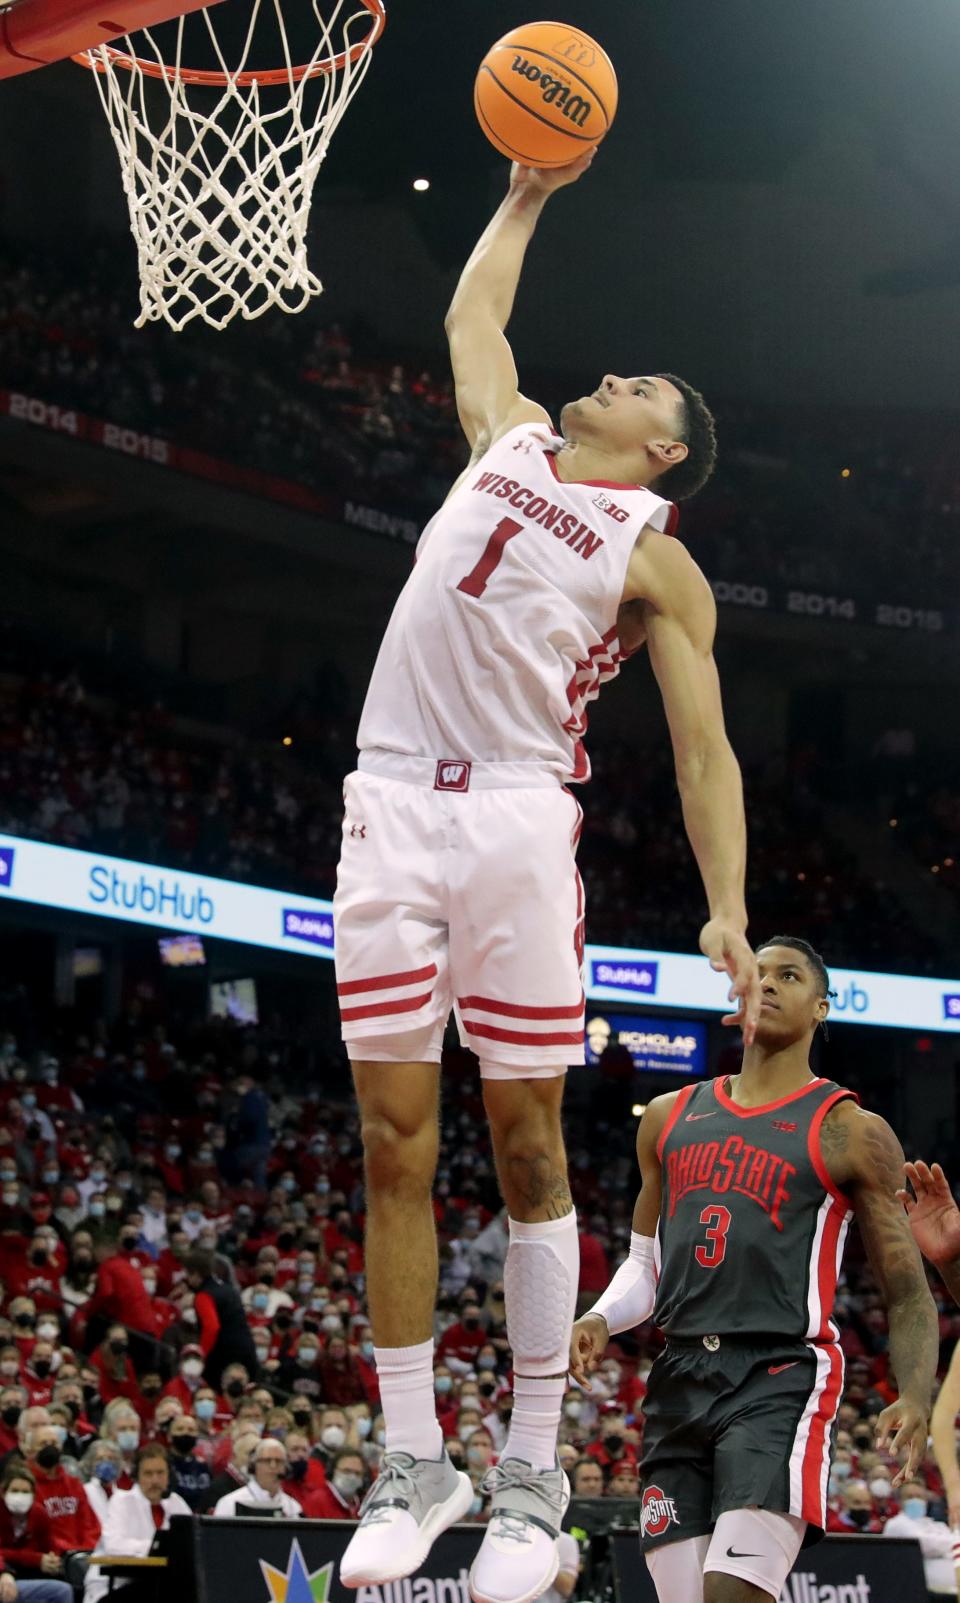 Wisconsin guard Johnny Davis has become one of the nation's top players.